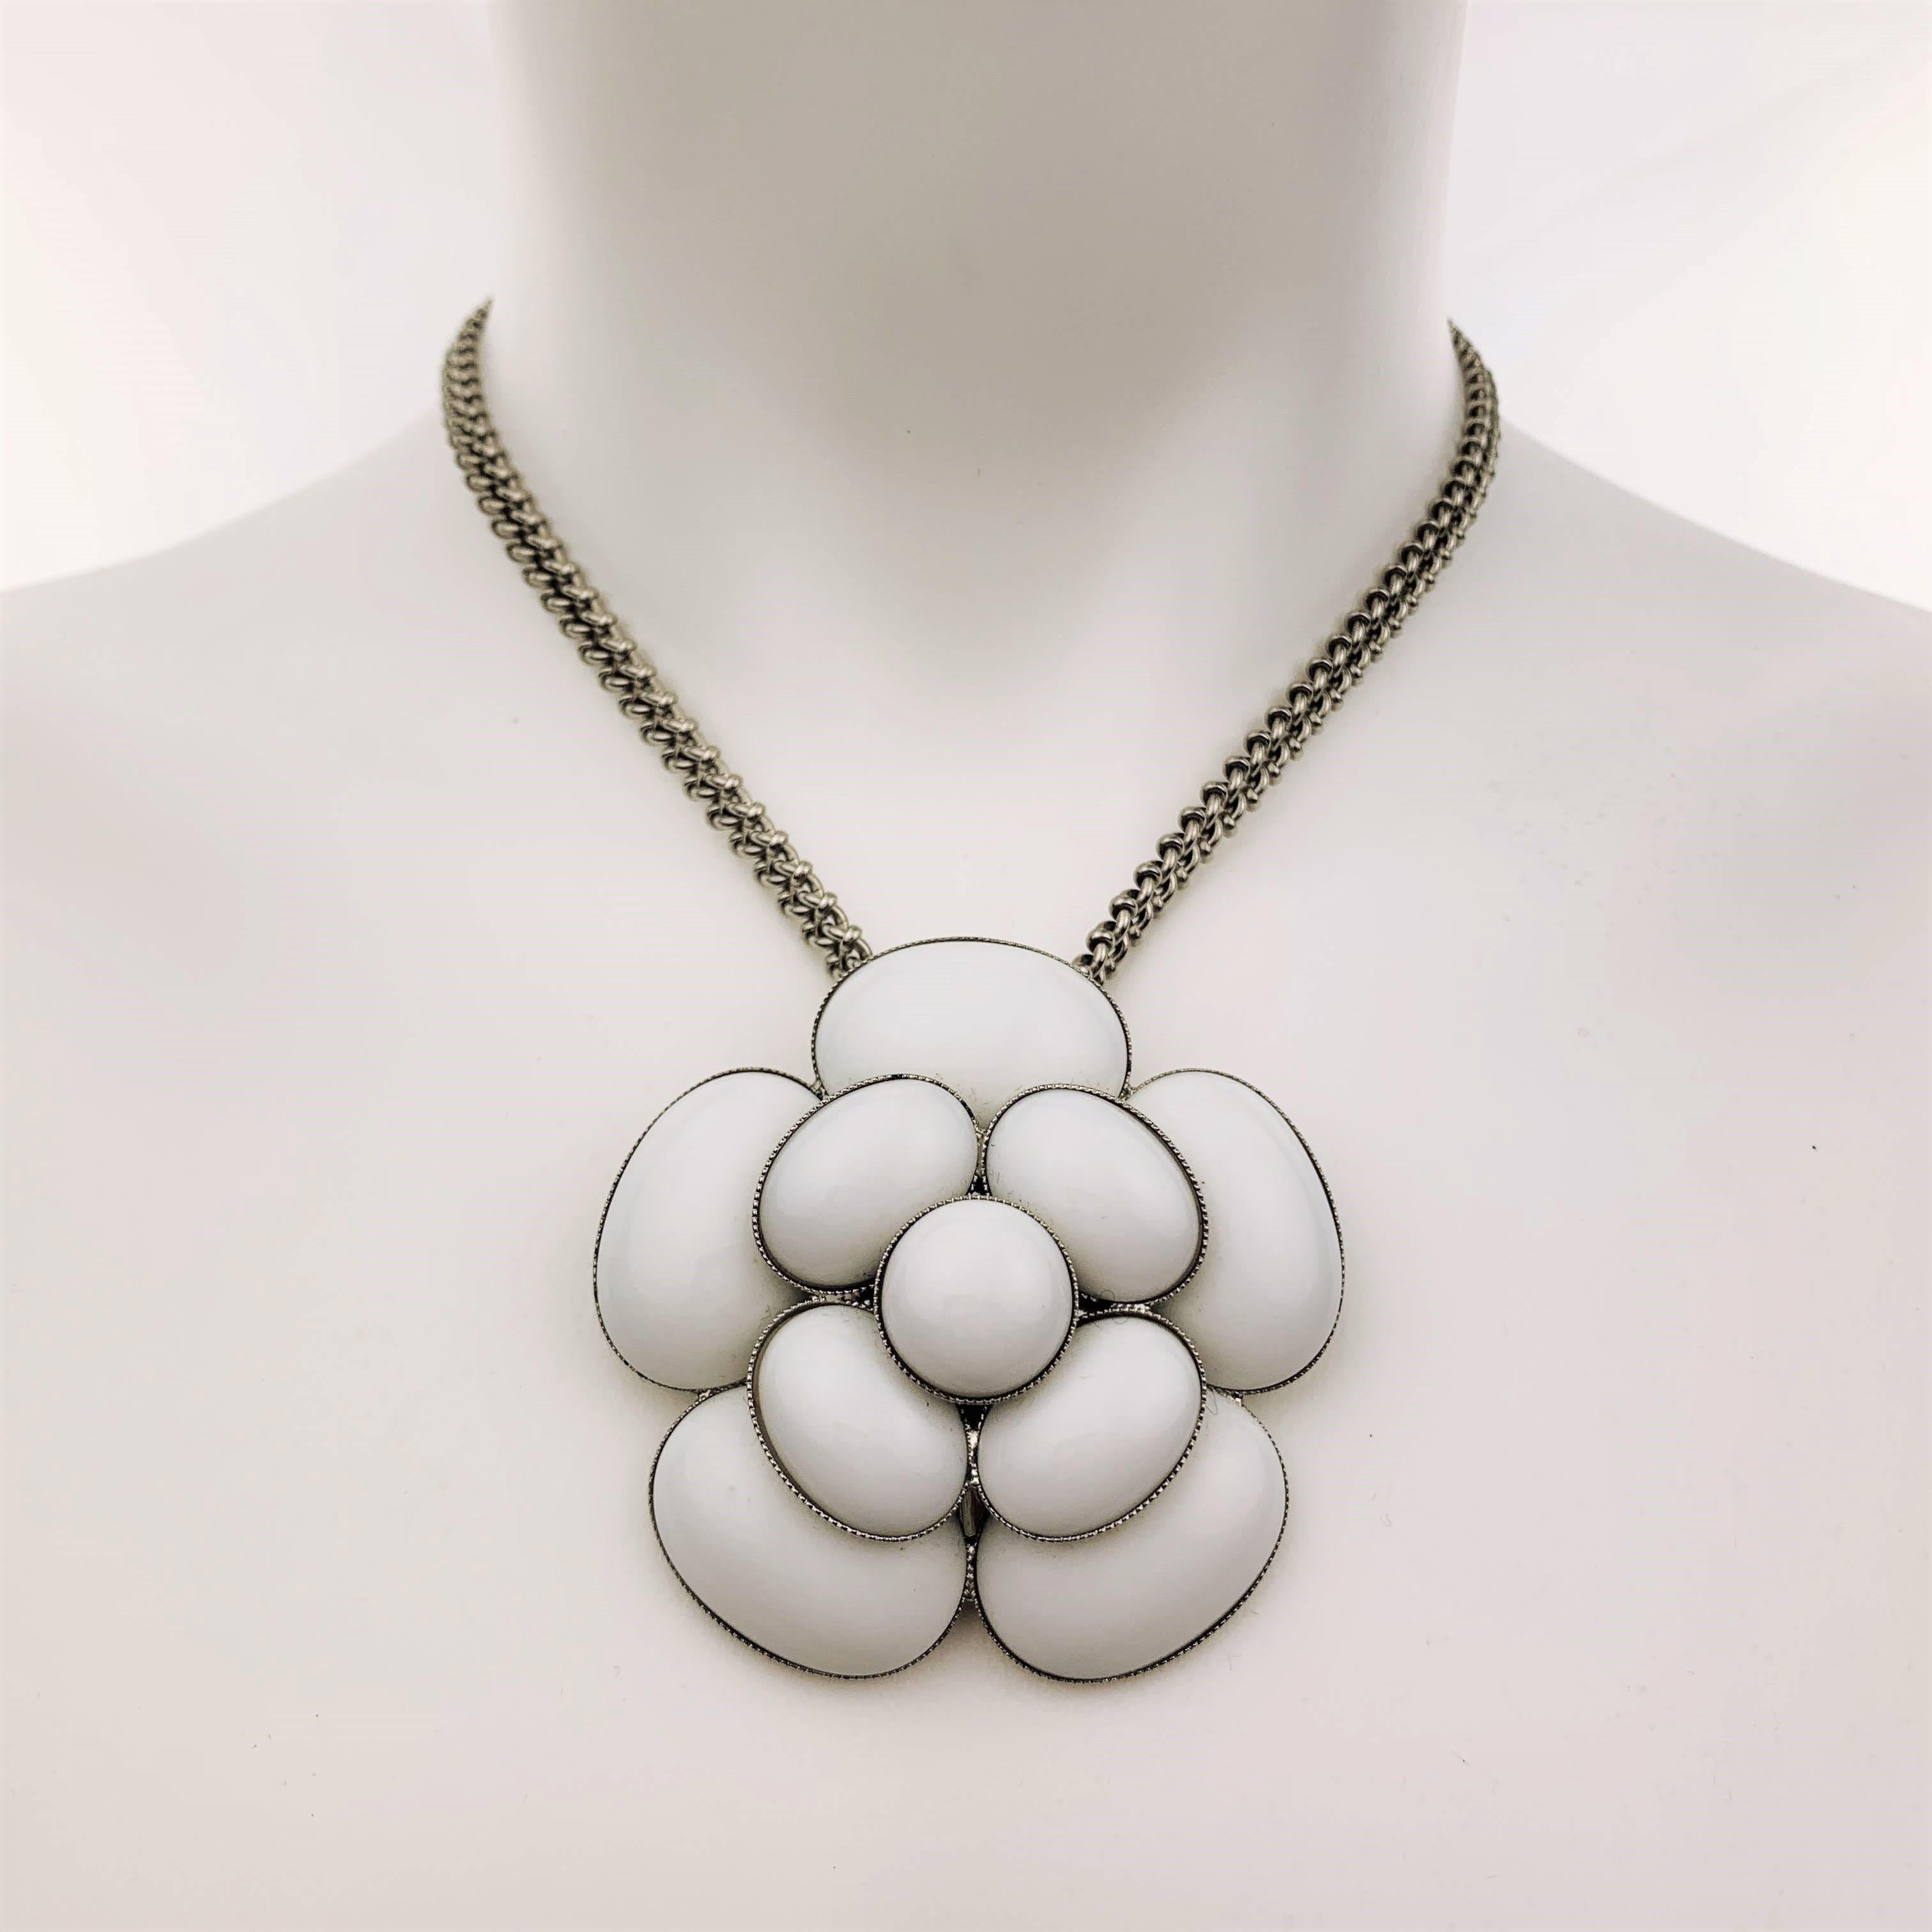 Vintage CHANEL circa 1998 necklace features a 3D white enamel Camellia floral pendant on an adjustable silver tone metal chain with CC logo charm. Made in France.
 
Excellent Pre-Owned Condition.
Marked: 98 C
 
Chain: 18 in.
Pendant: 6 x 6 cm.